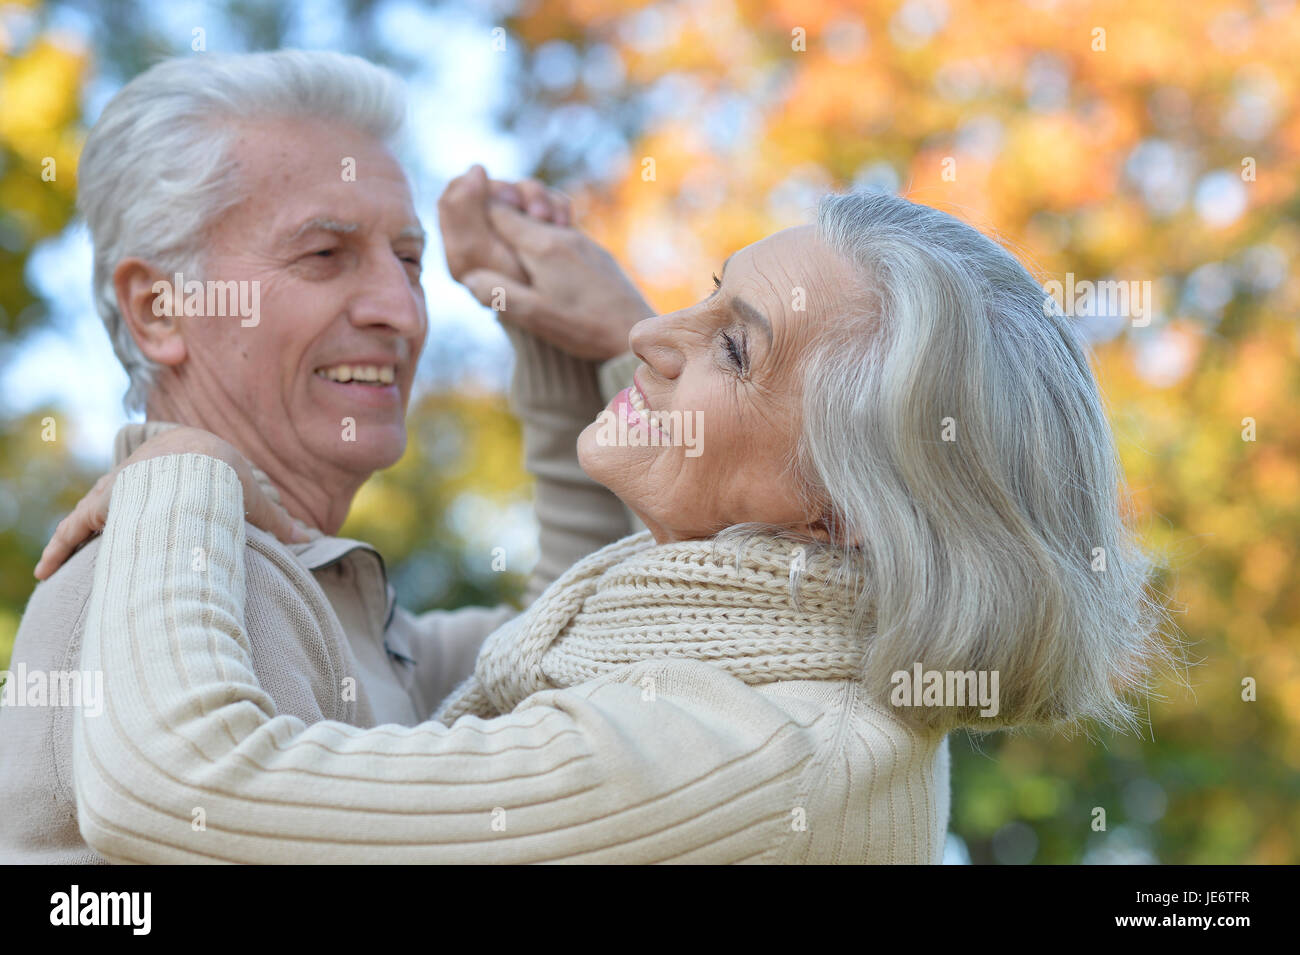 Senior couple dancing in the park Banque D'Images